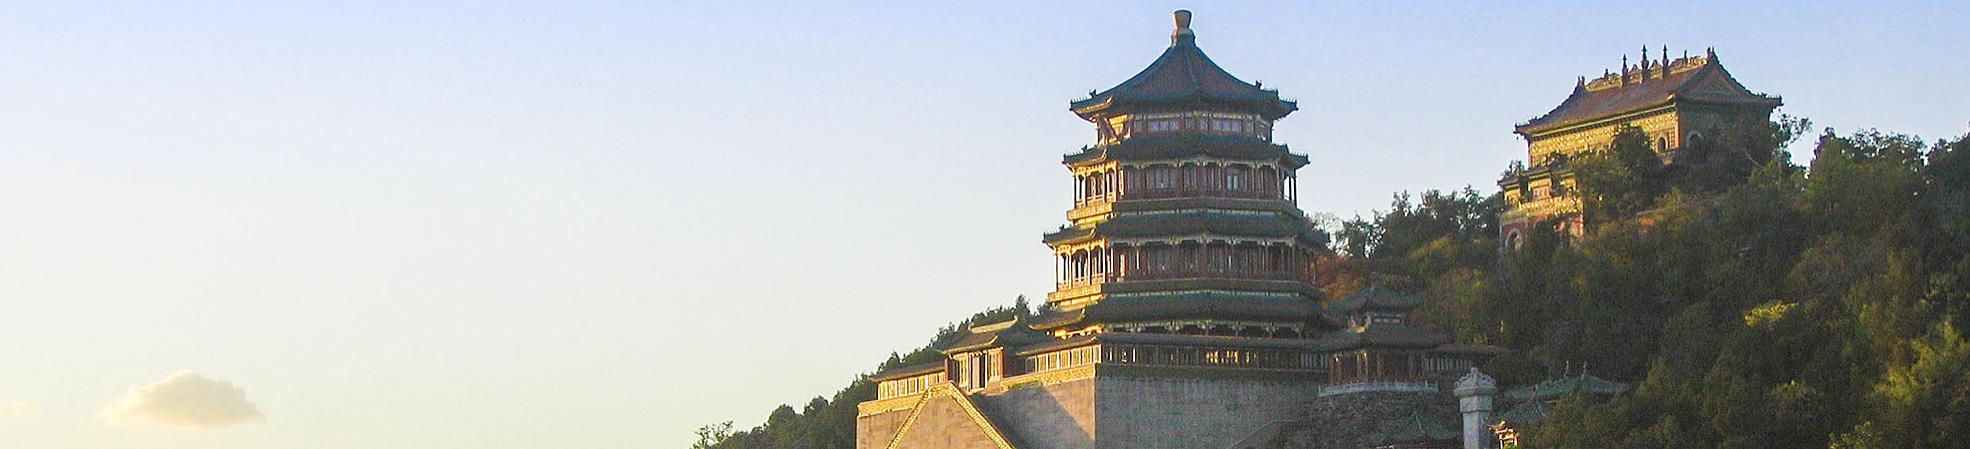 Smmer Palace in Beijing